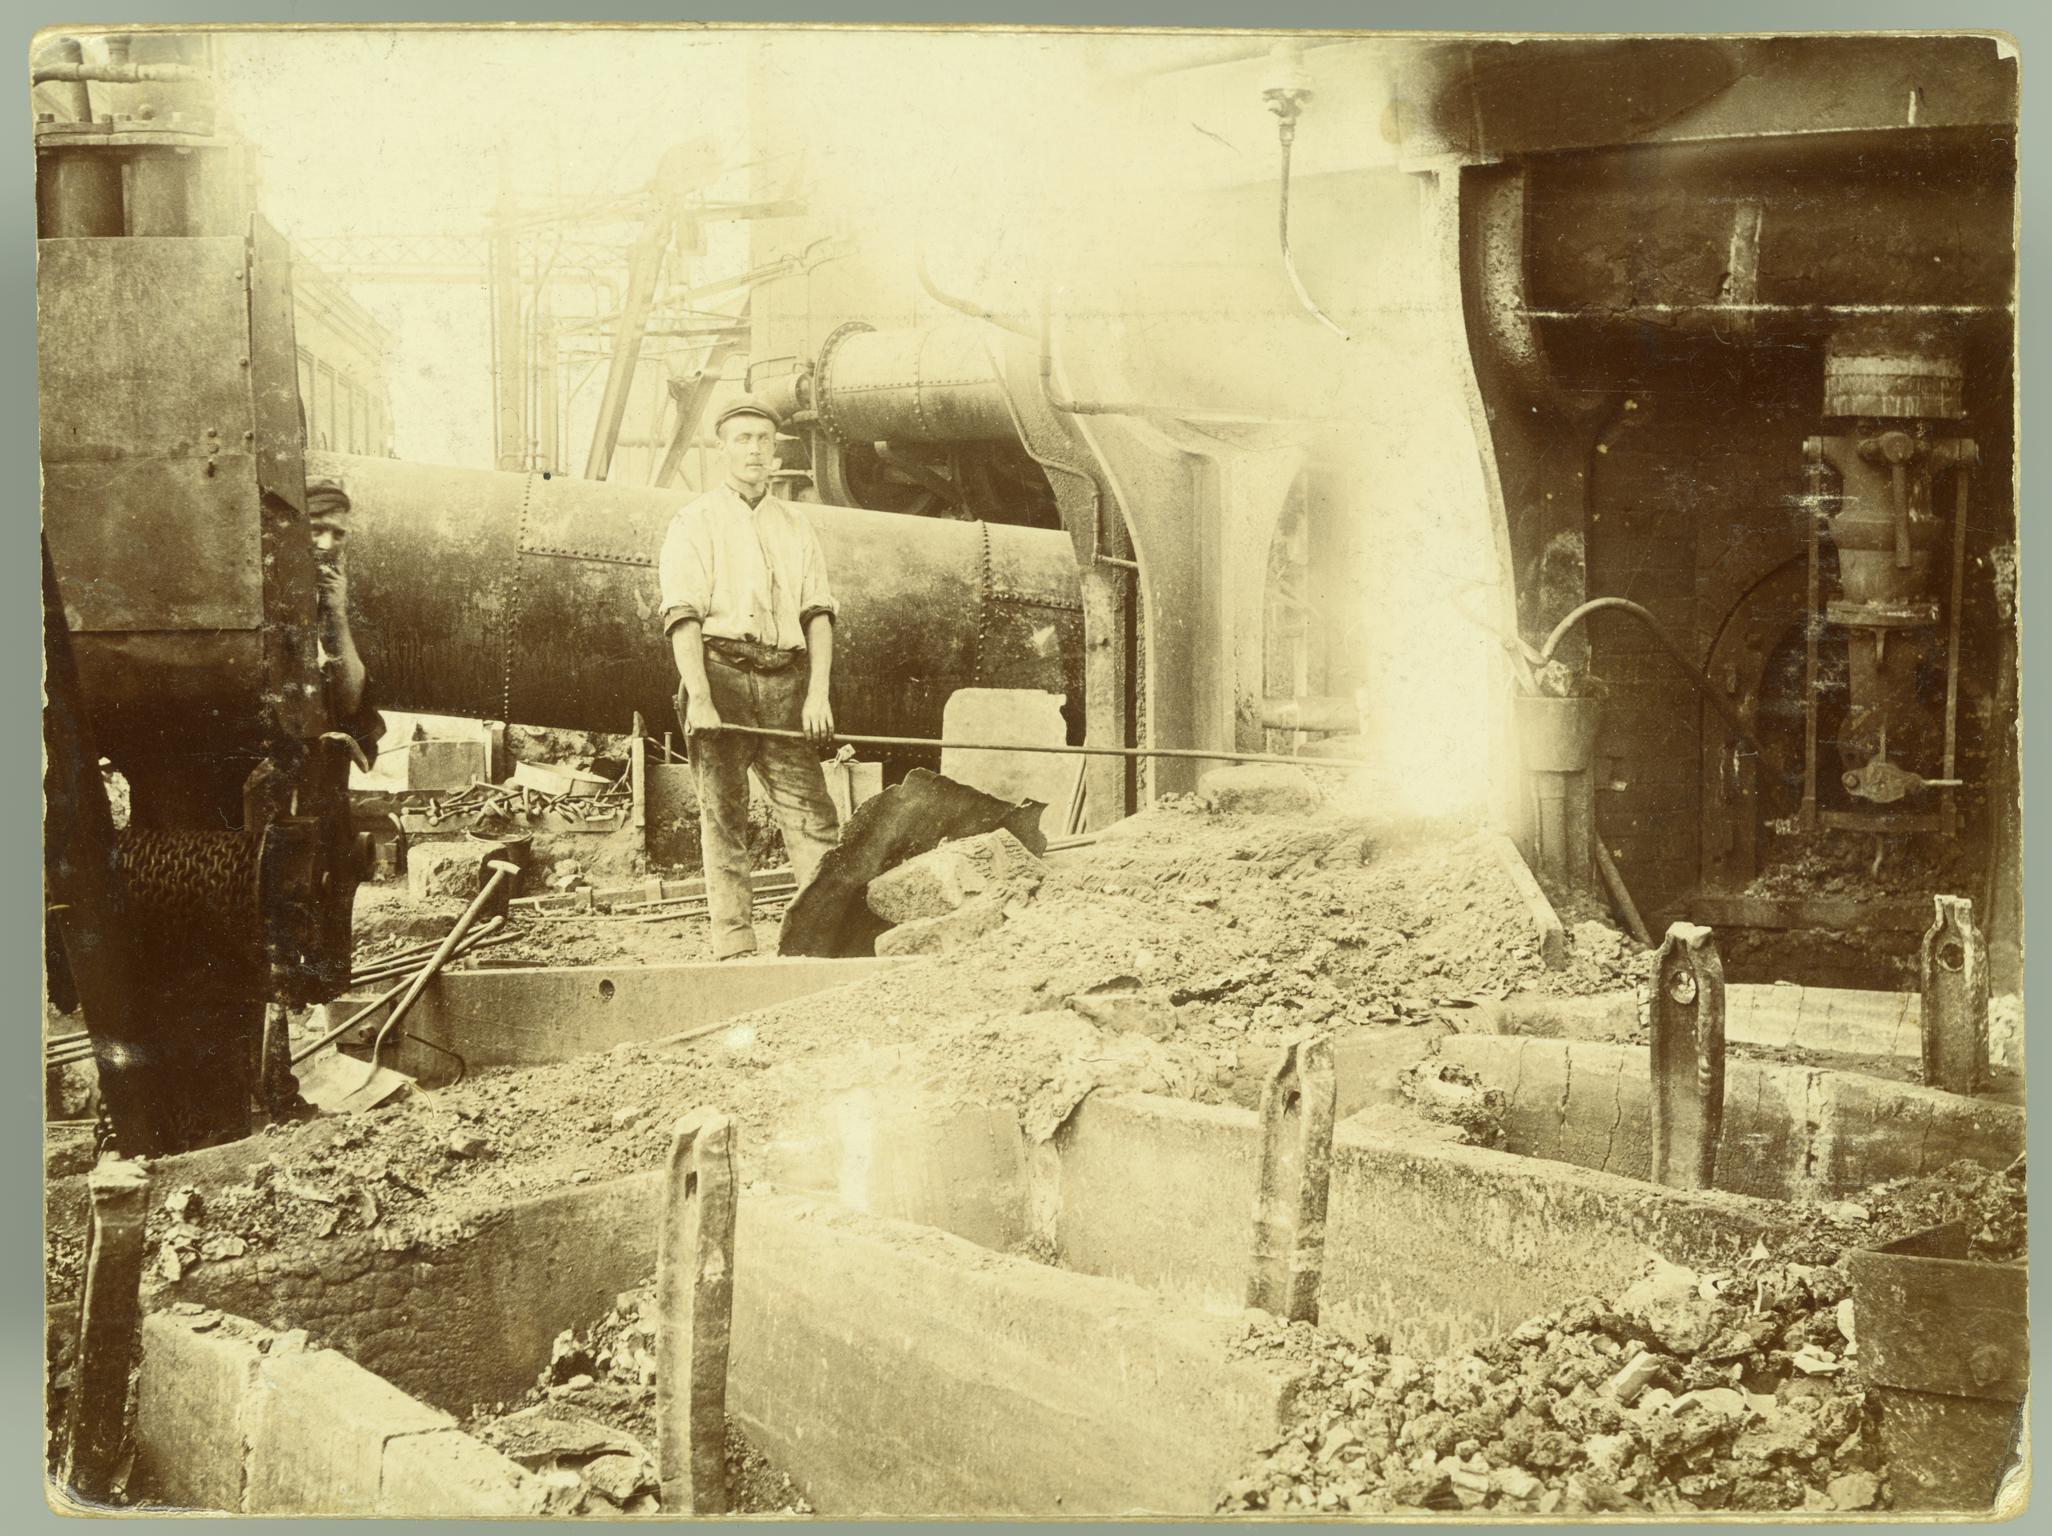 Ebbw Vale steelworks, photograph